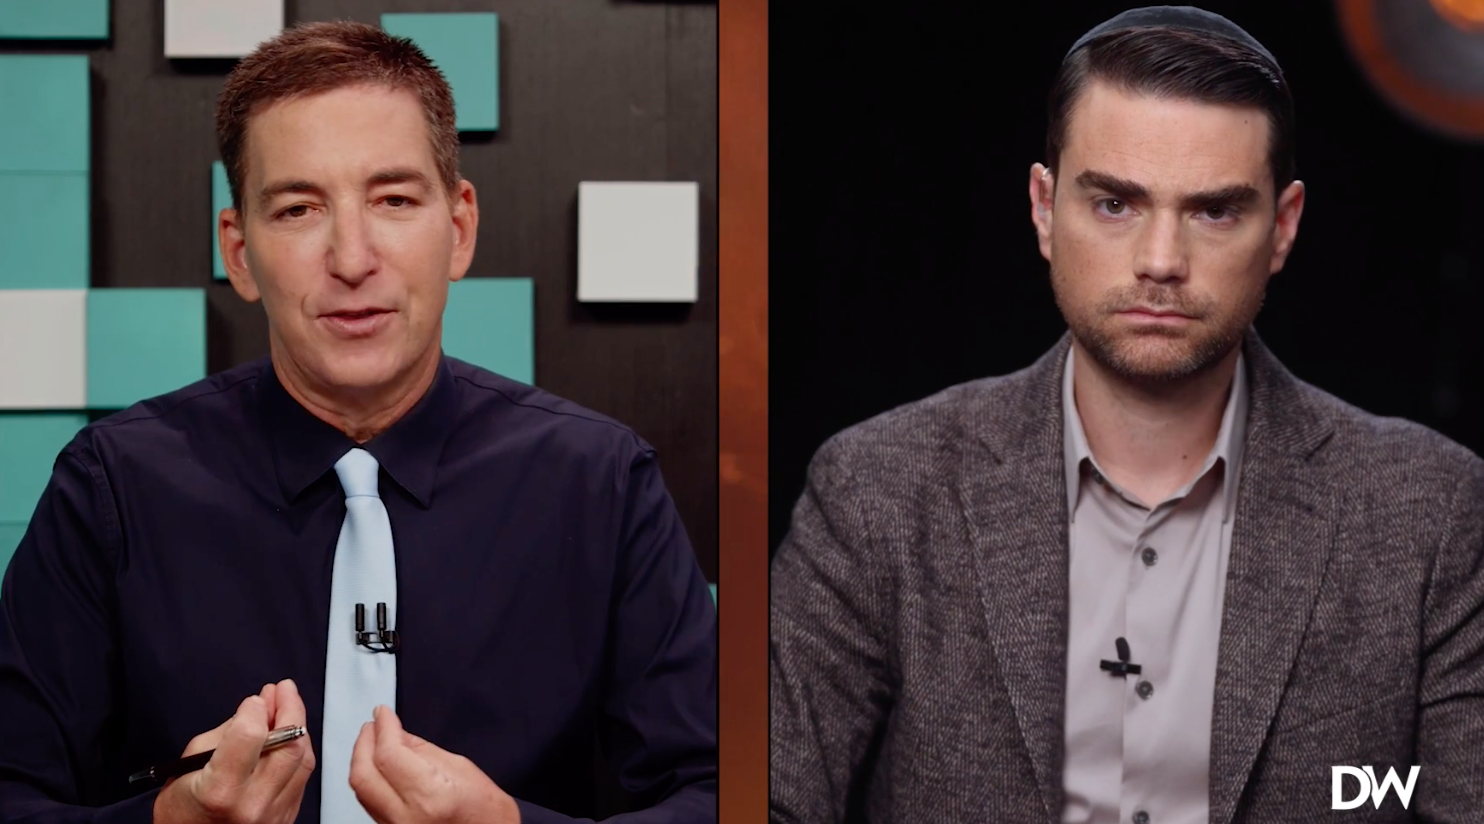 Greenwald discusses Snowden, Trump targeting, and more in Shapiro’s ‘Sunday Special’.